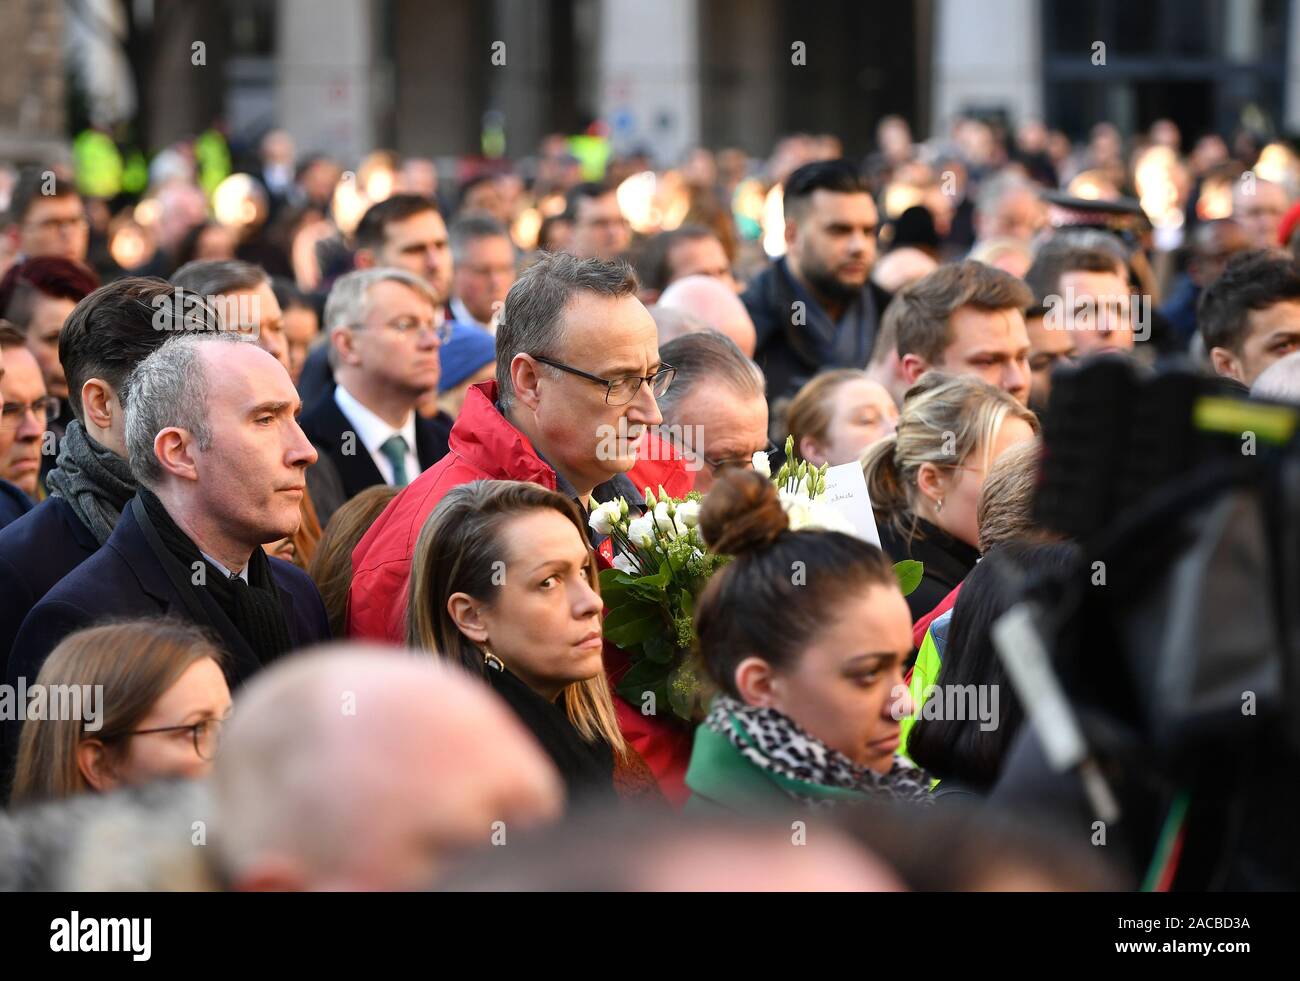 People at a vigil in Guildhall Yard, London, to honour the victims off the London Bridge terror attack, as well as the members of the public and emergency services who risked their lives to help others after a terrorist wearing a fake suicide vest went on a knife rampage killing two people, was shot dead by police on Friday. Stock Photo